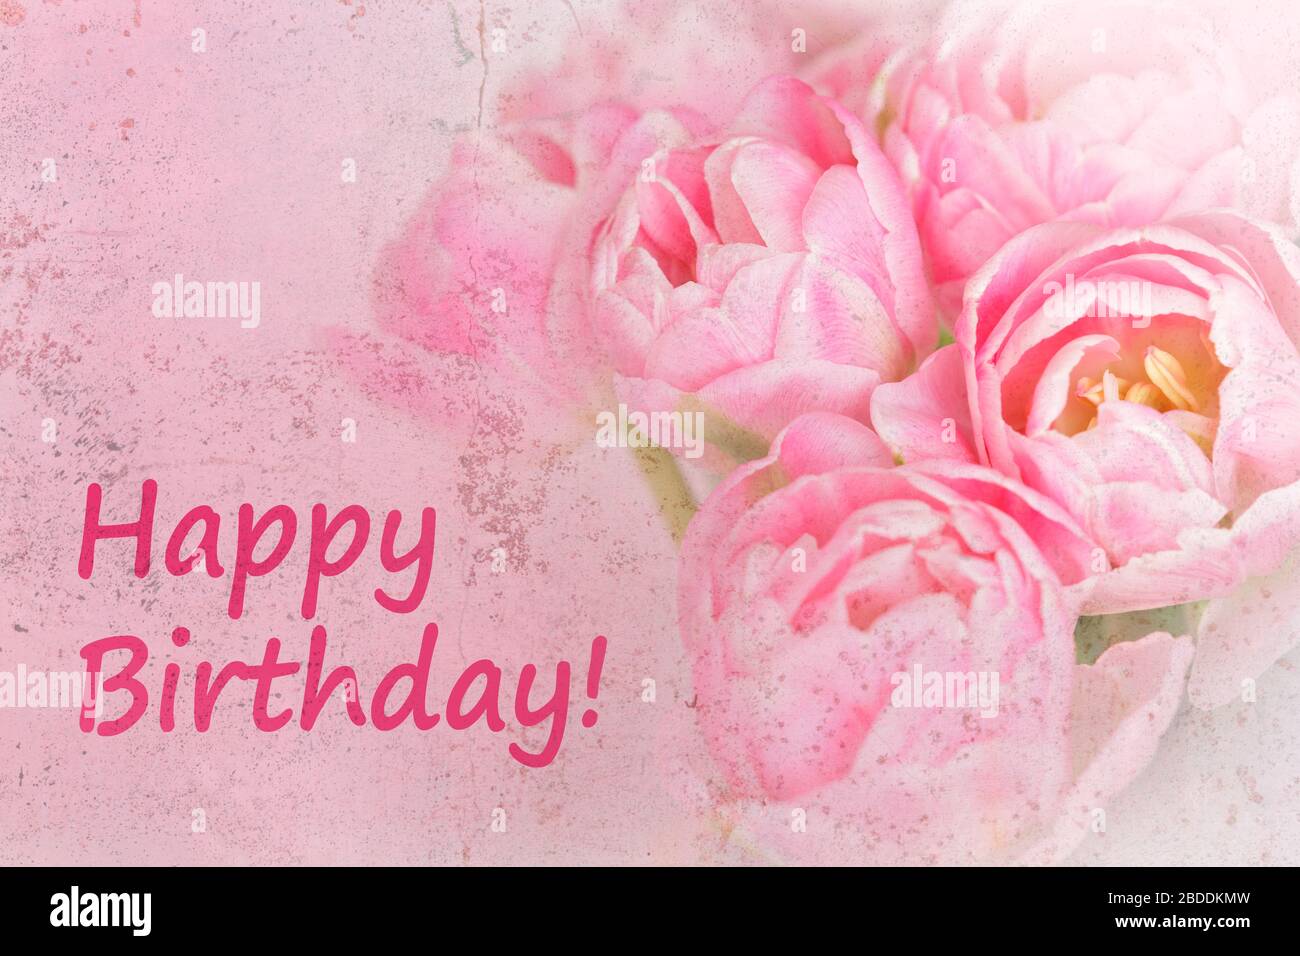 Nostalgic greeting cards template. Pink flowers with text: happy birthday, distressed grunge effect. Stock Photo